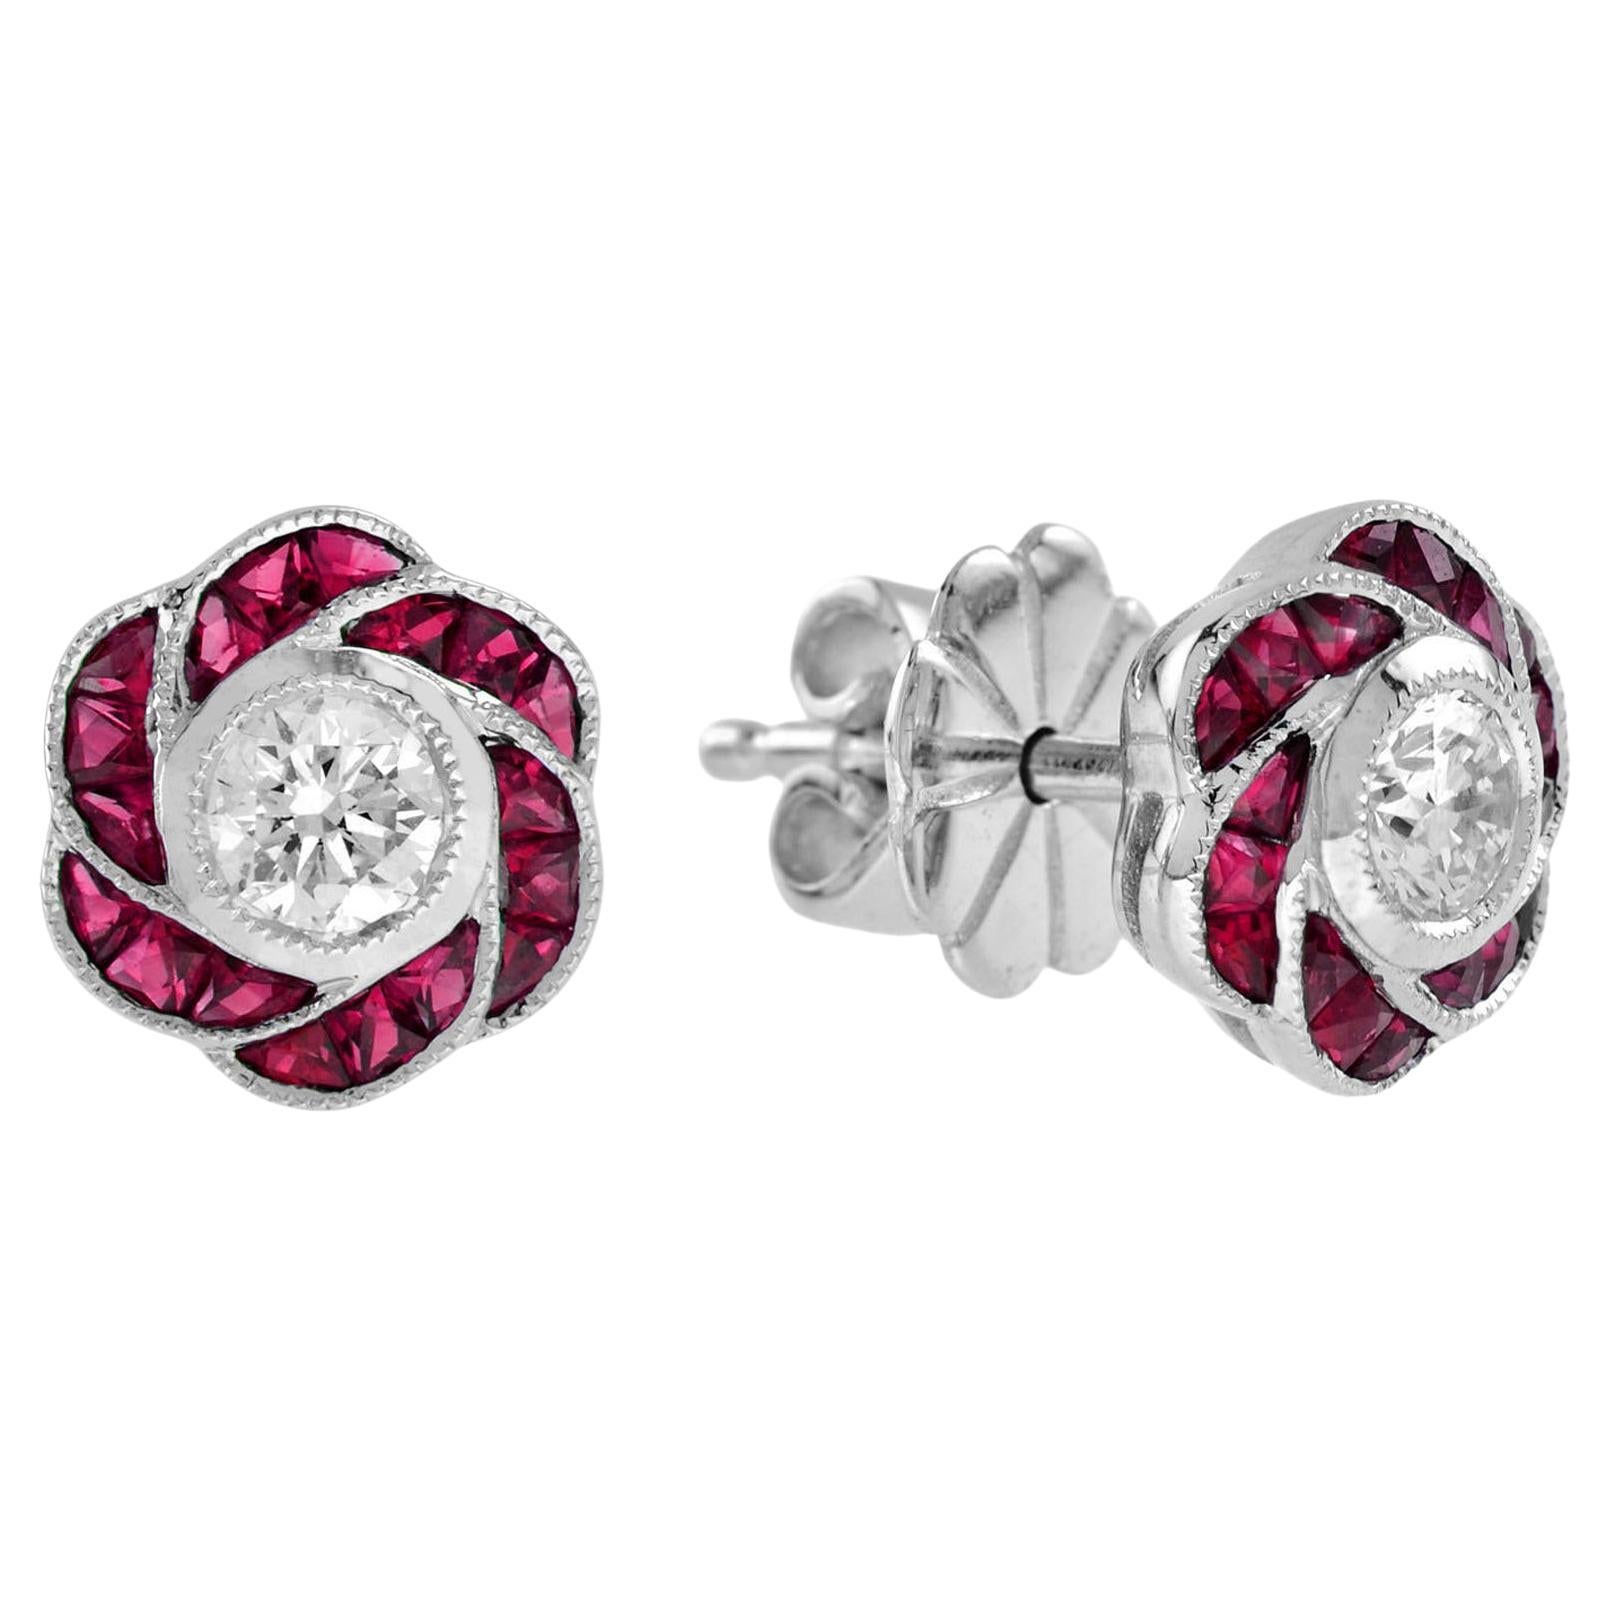 Round Cut Diamond with Ruby Art Deco Style Floral Stud Earrings in 18K Gold